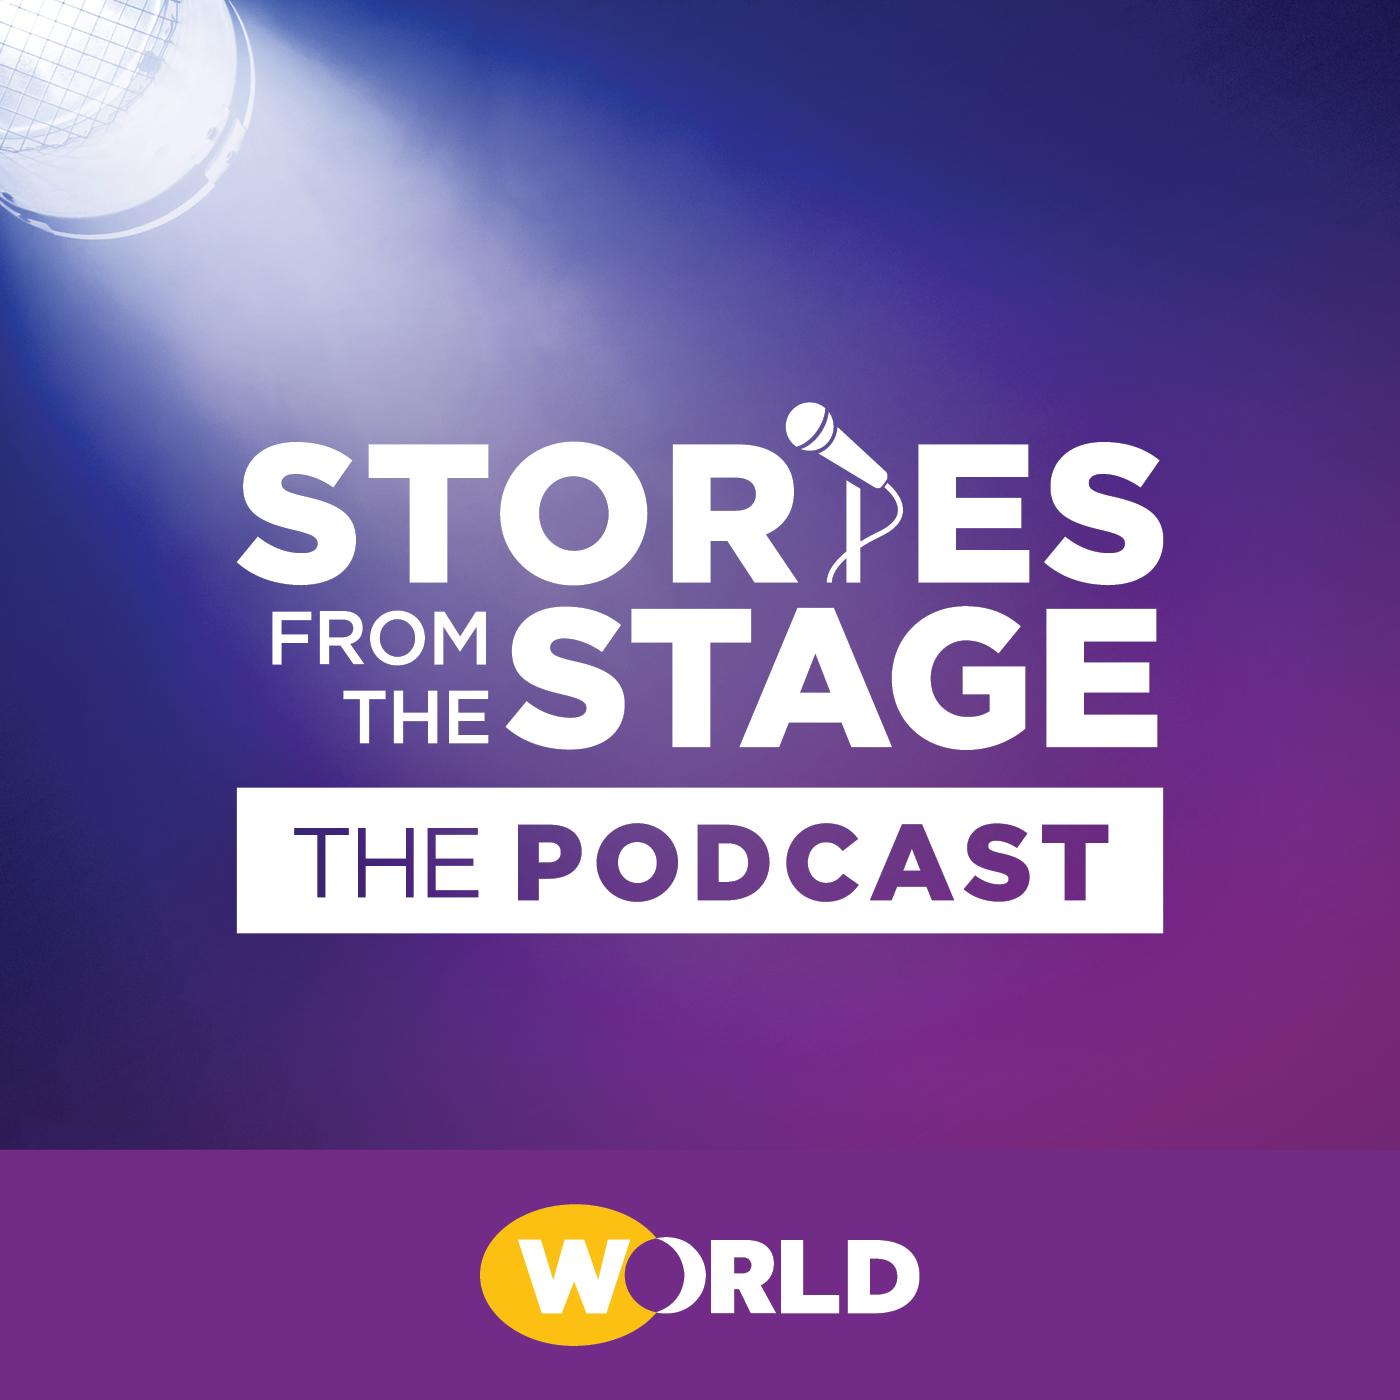 Thumbnail for "Stories from the Stage".